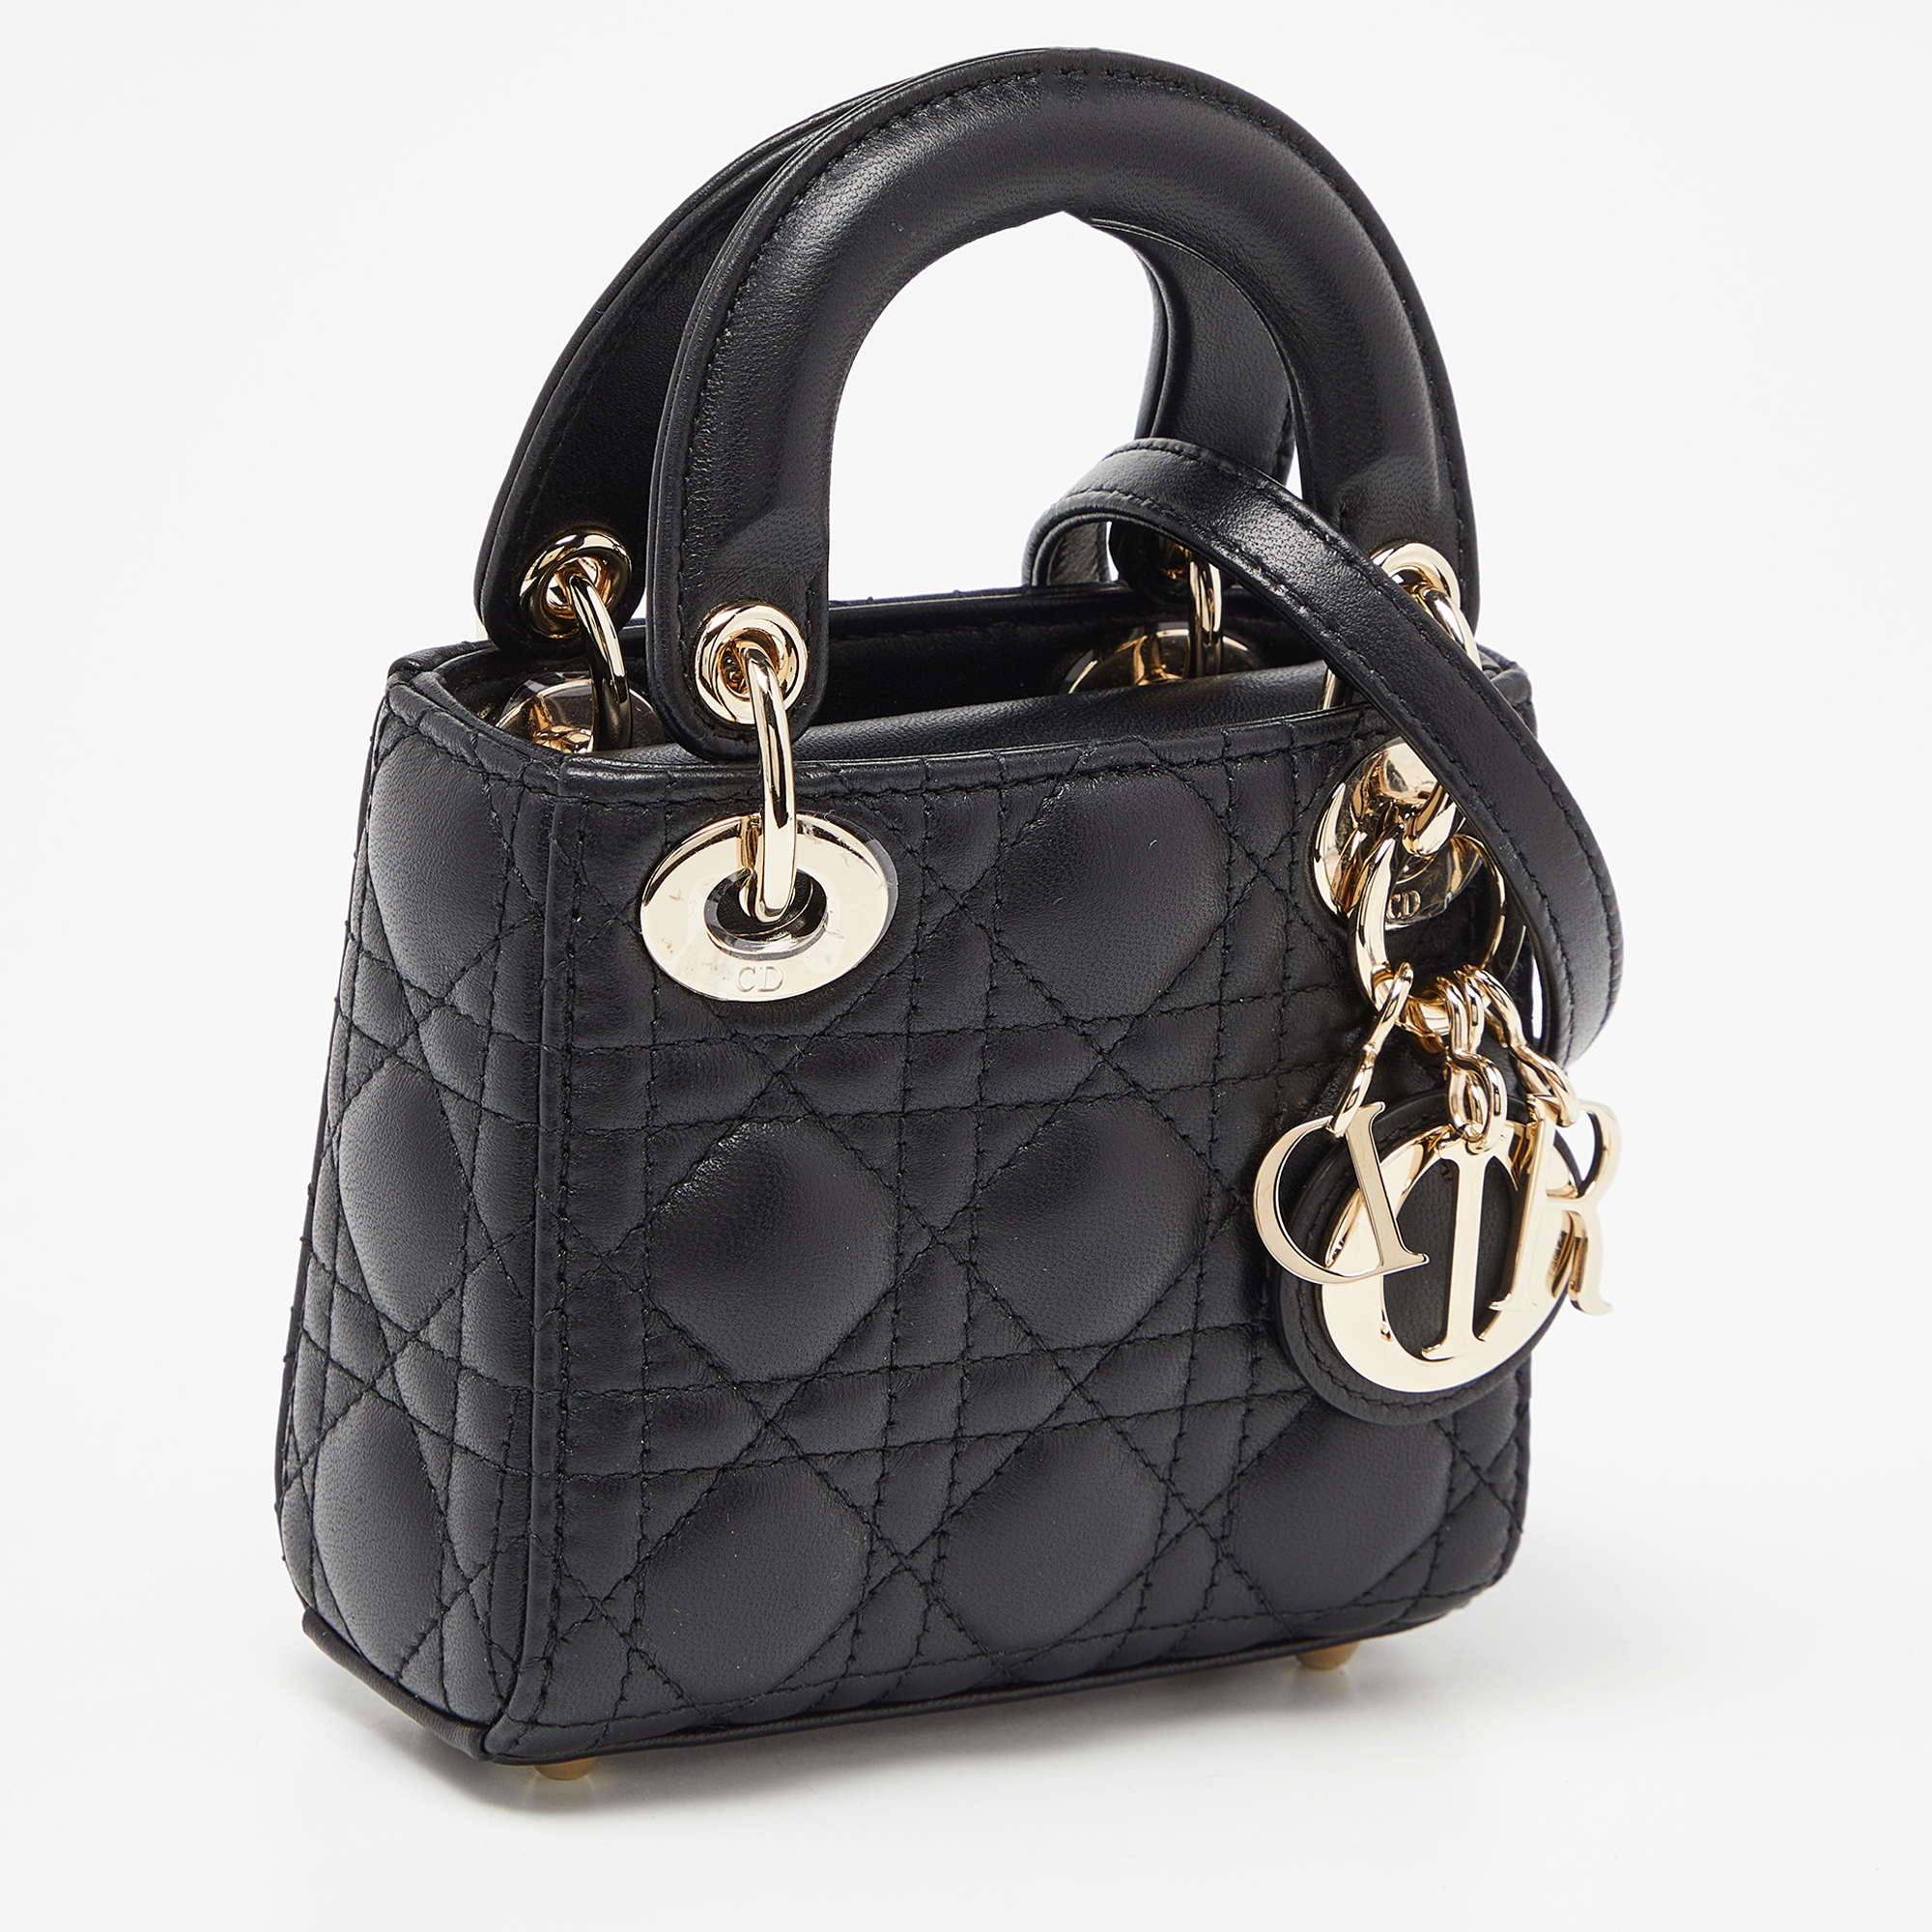 Dior Black Cannage Leather Micro Lady Dior Tote